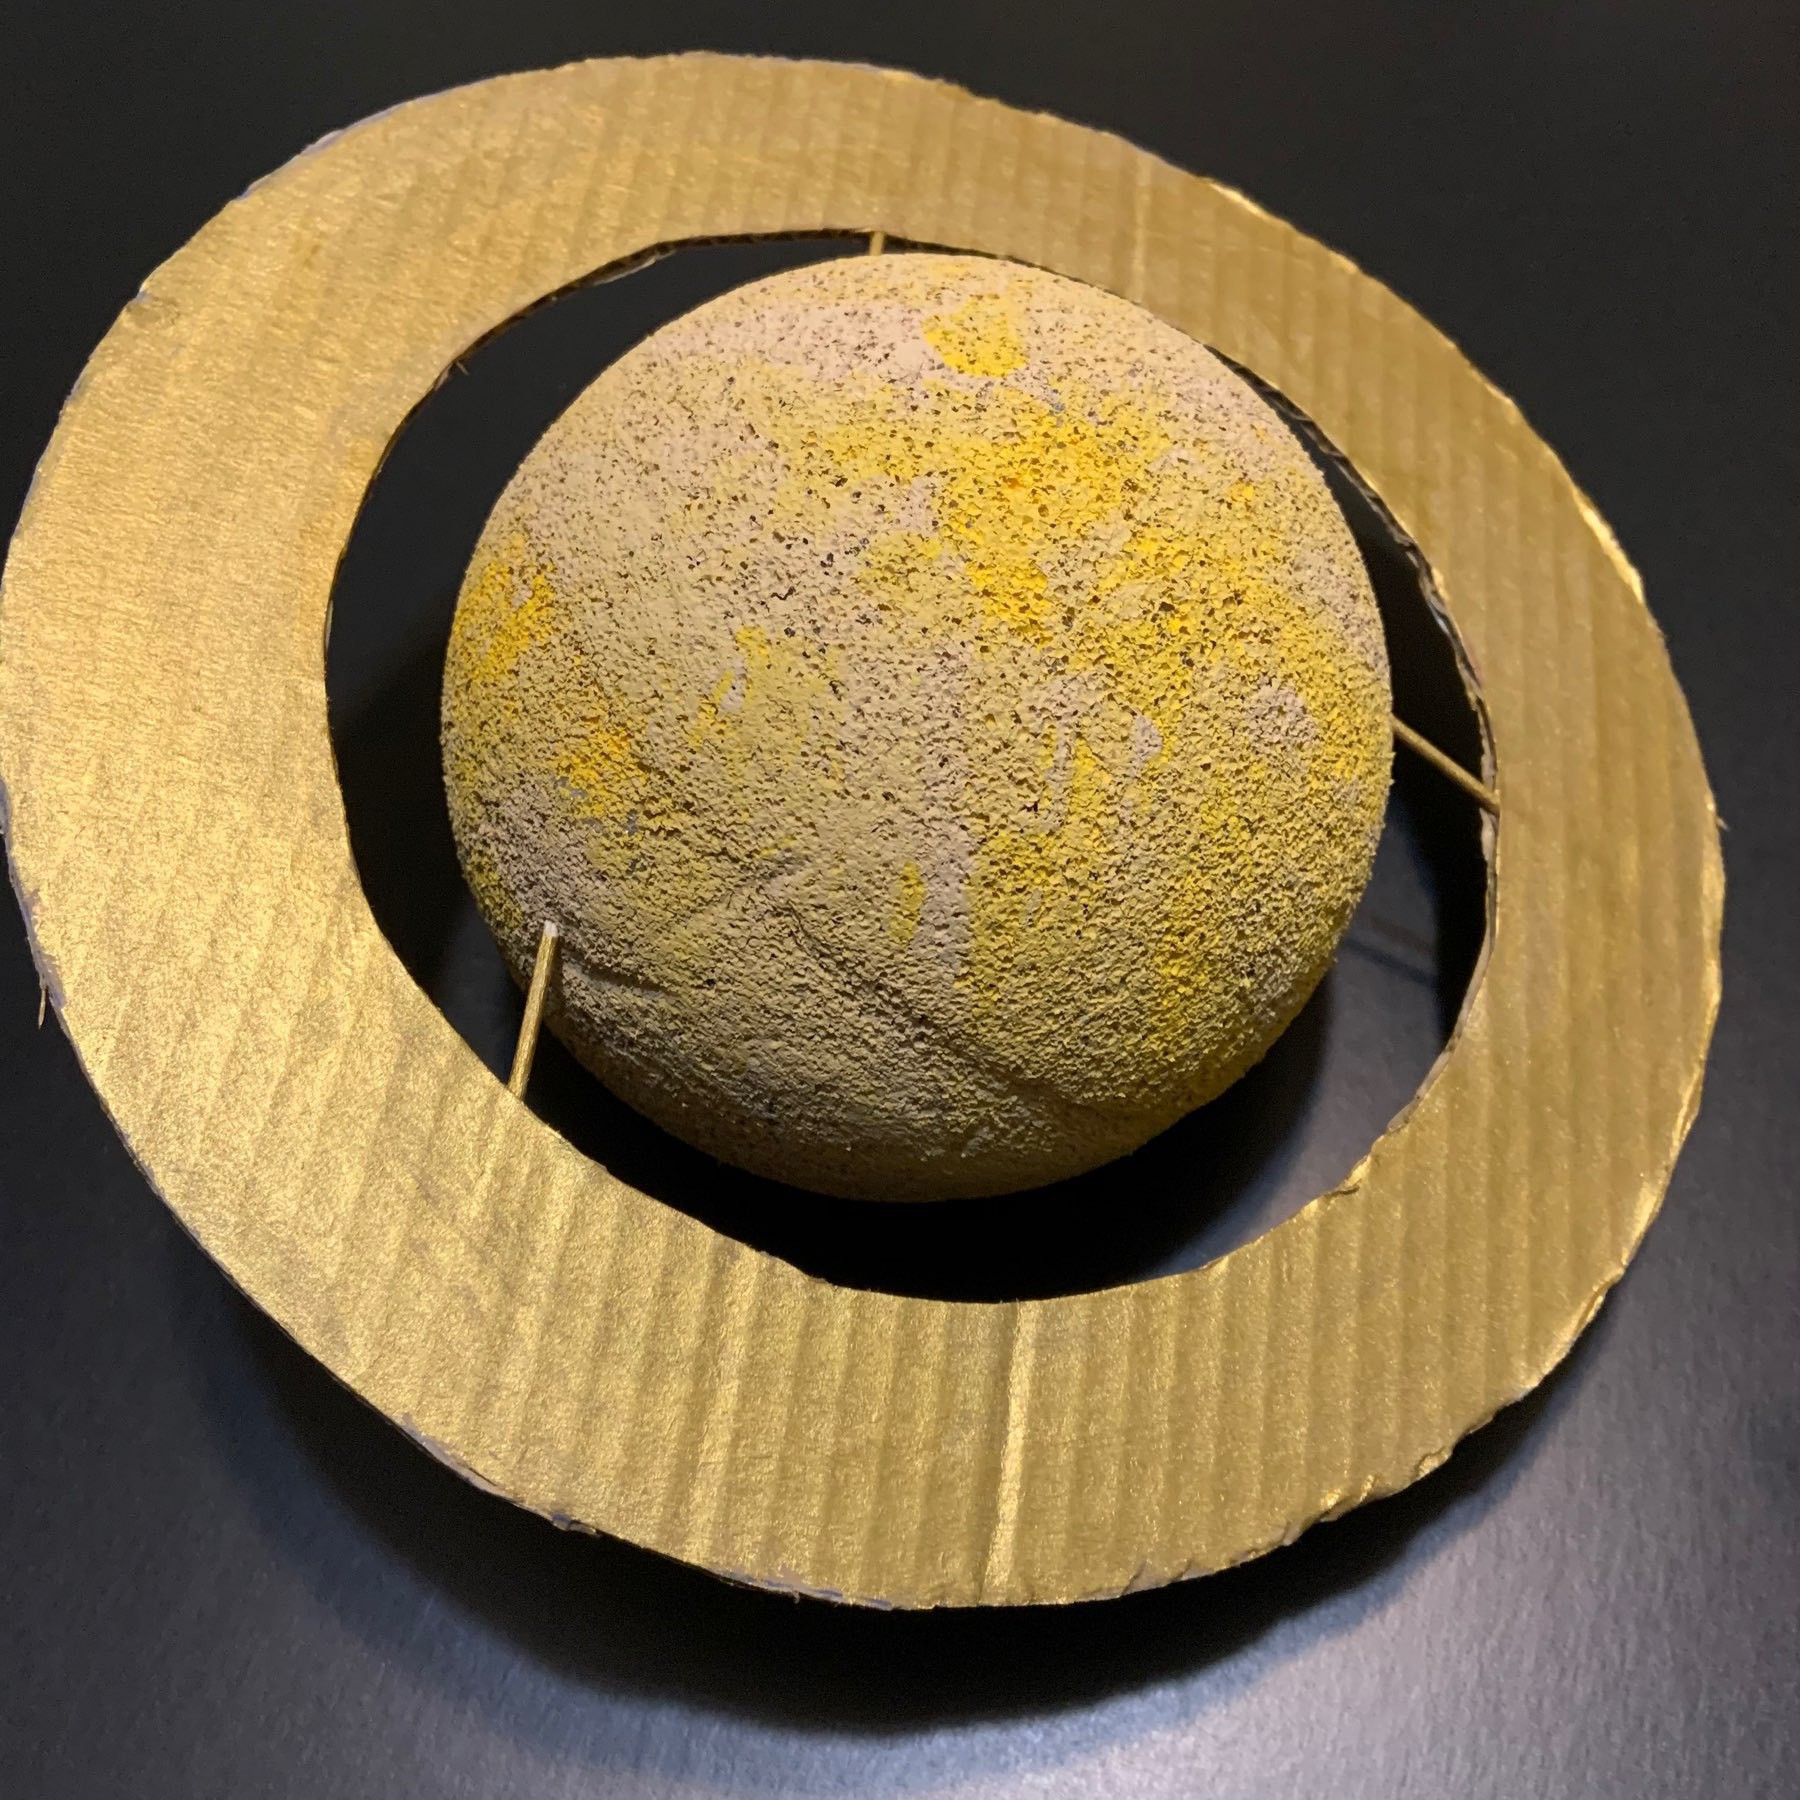 A simple model of thr planet Saturn